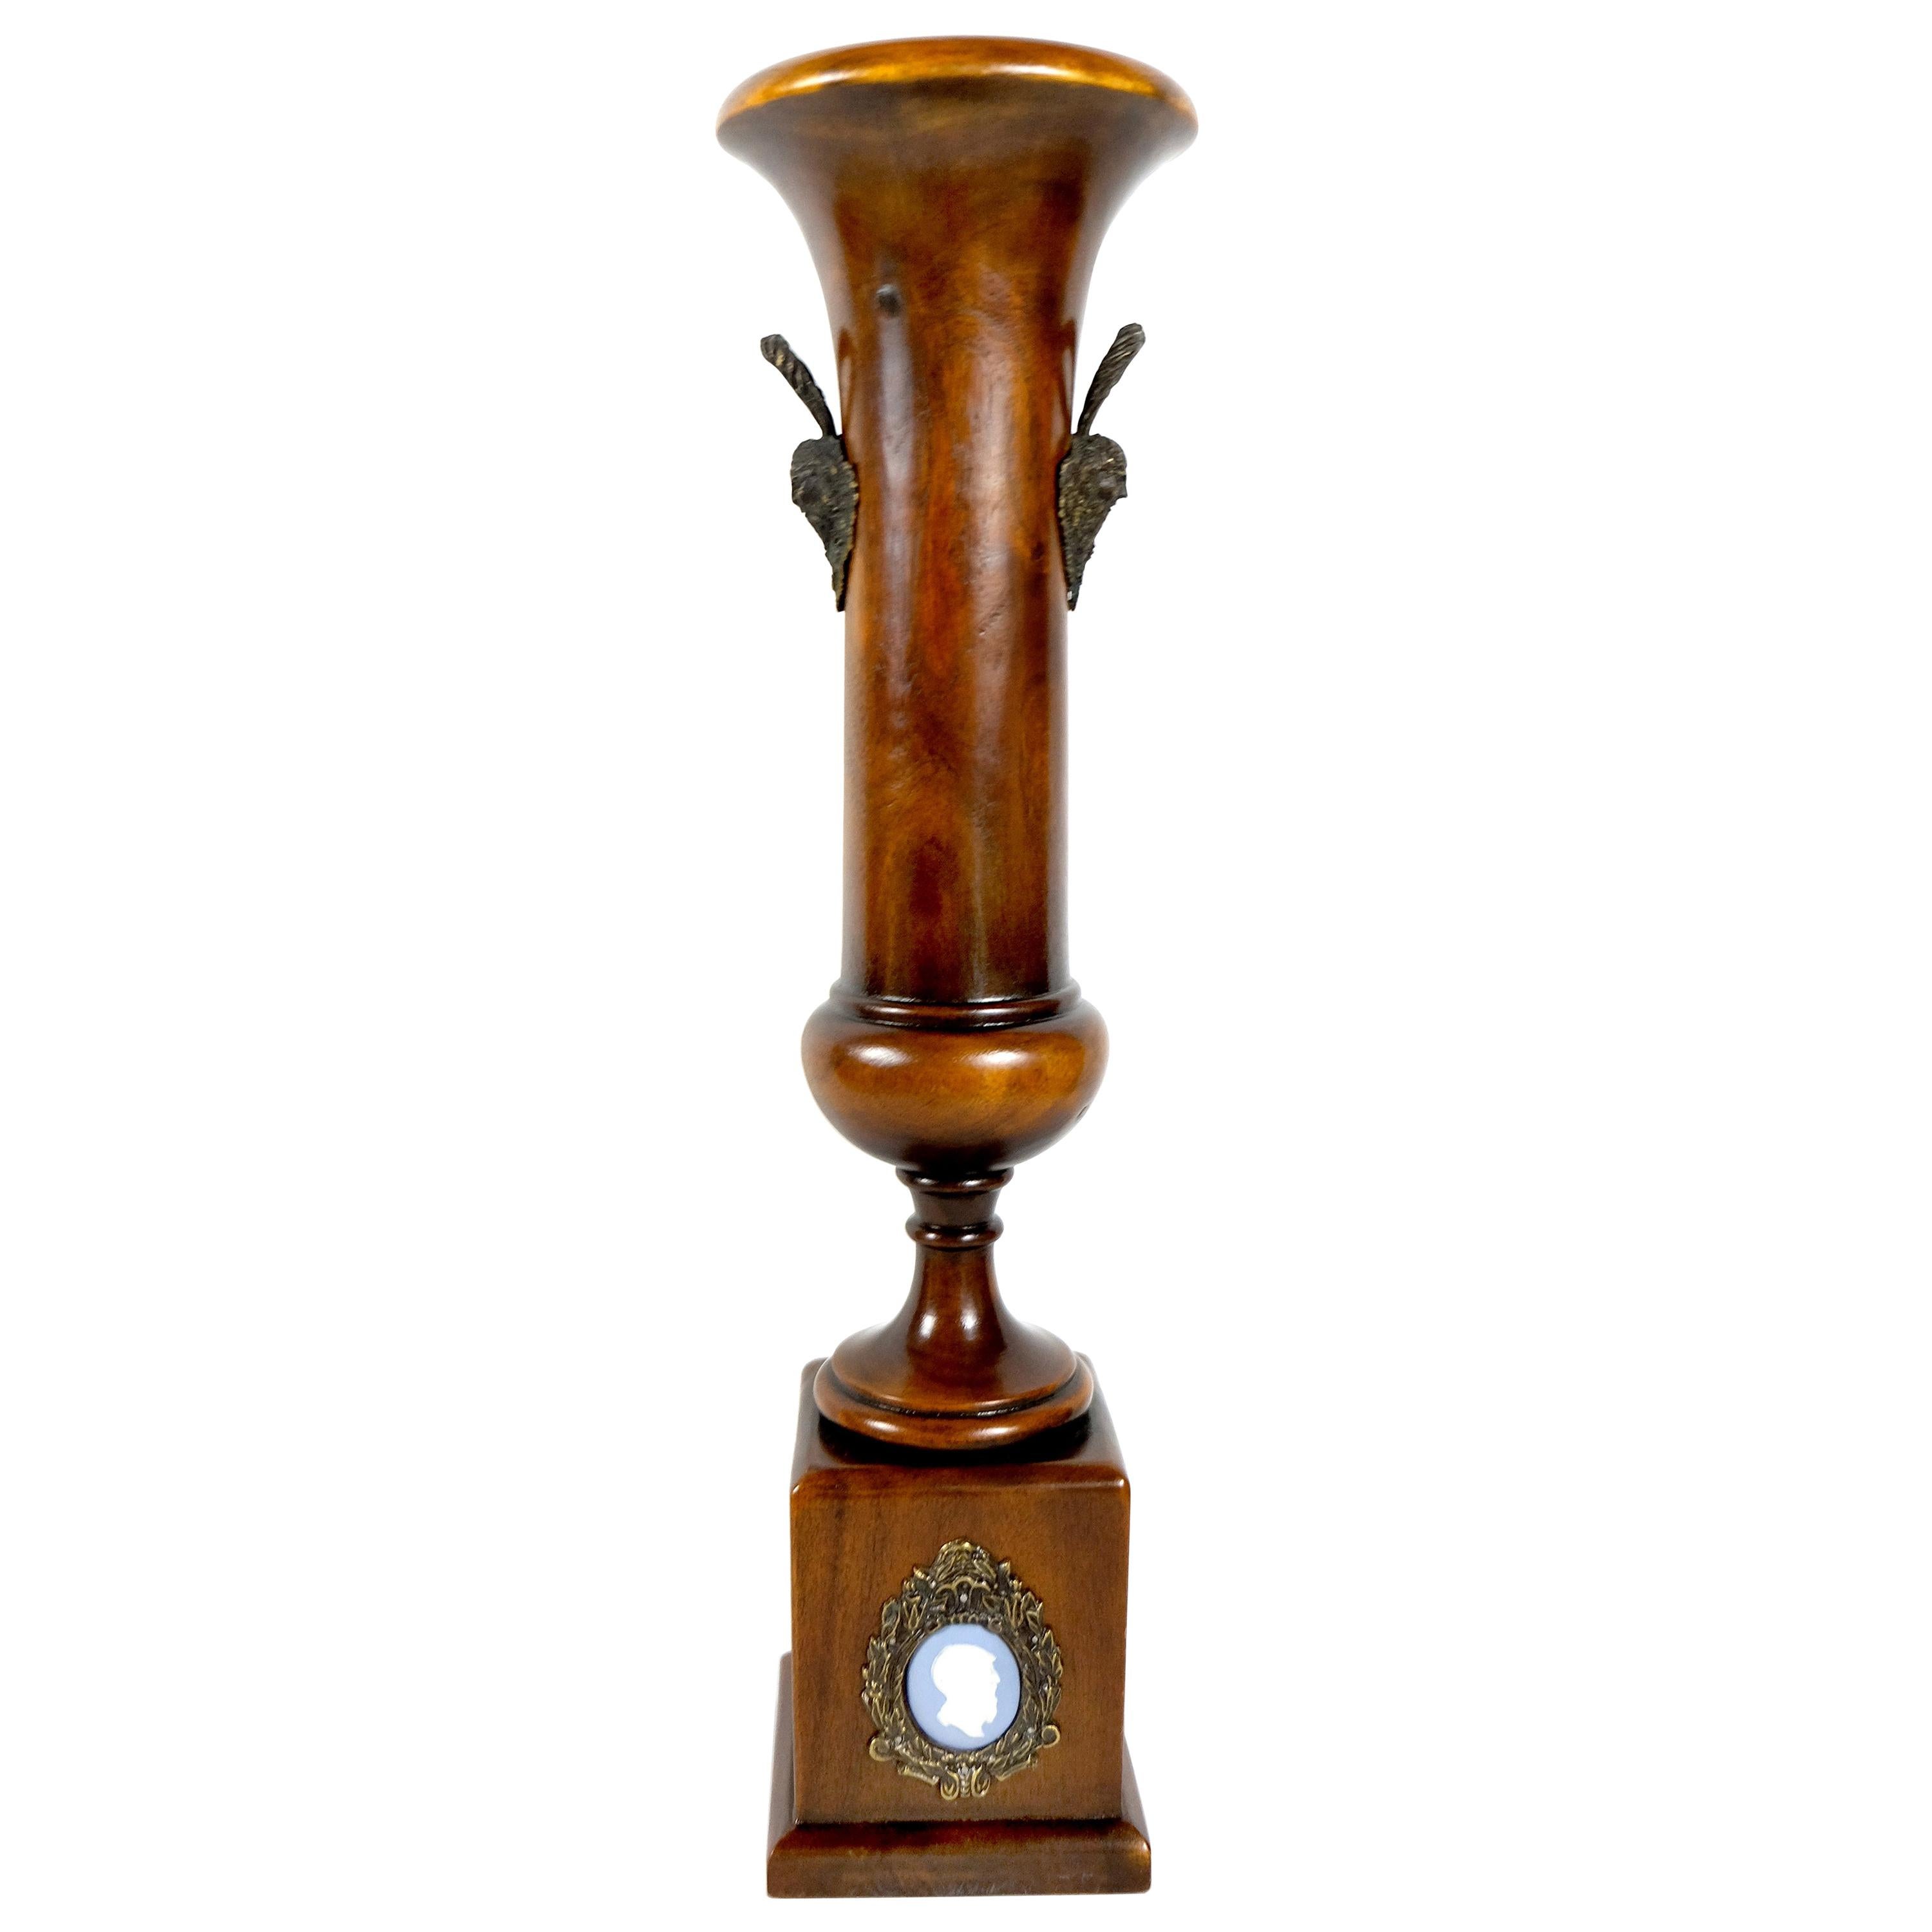 Wooden Pedestal Urn Vase by Theodore Alexander with Bronze and Cameo Details